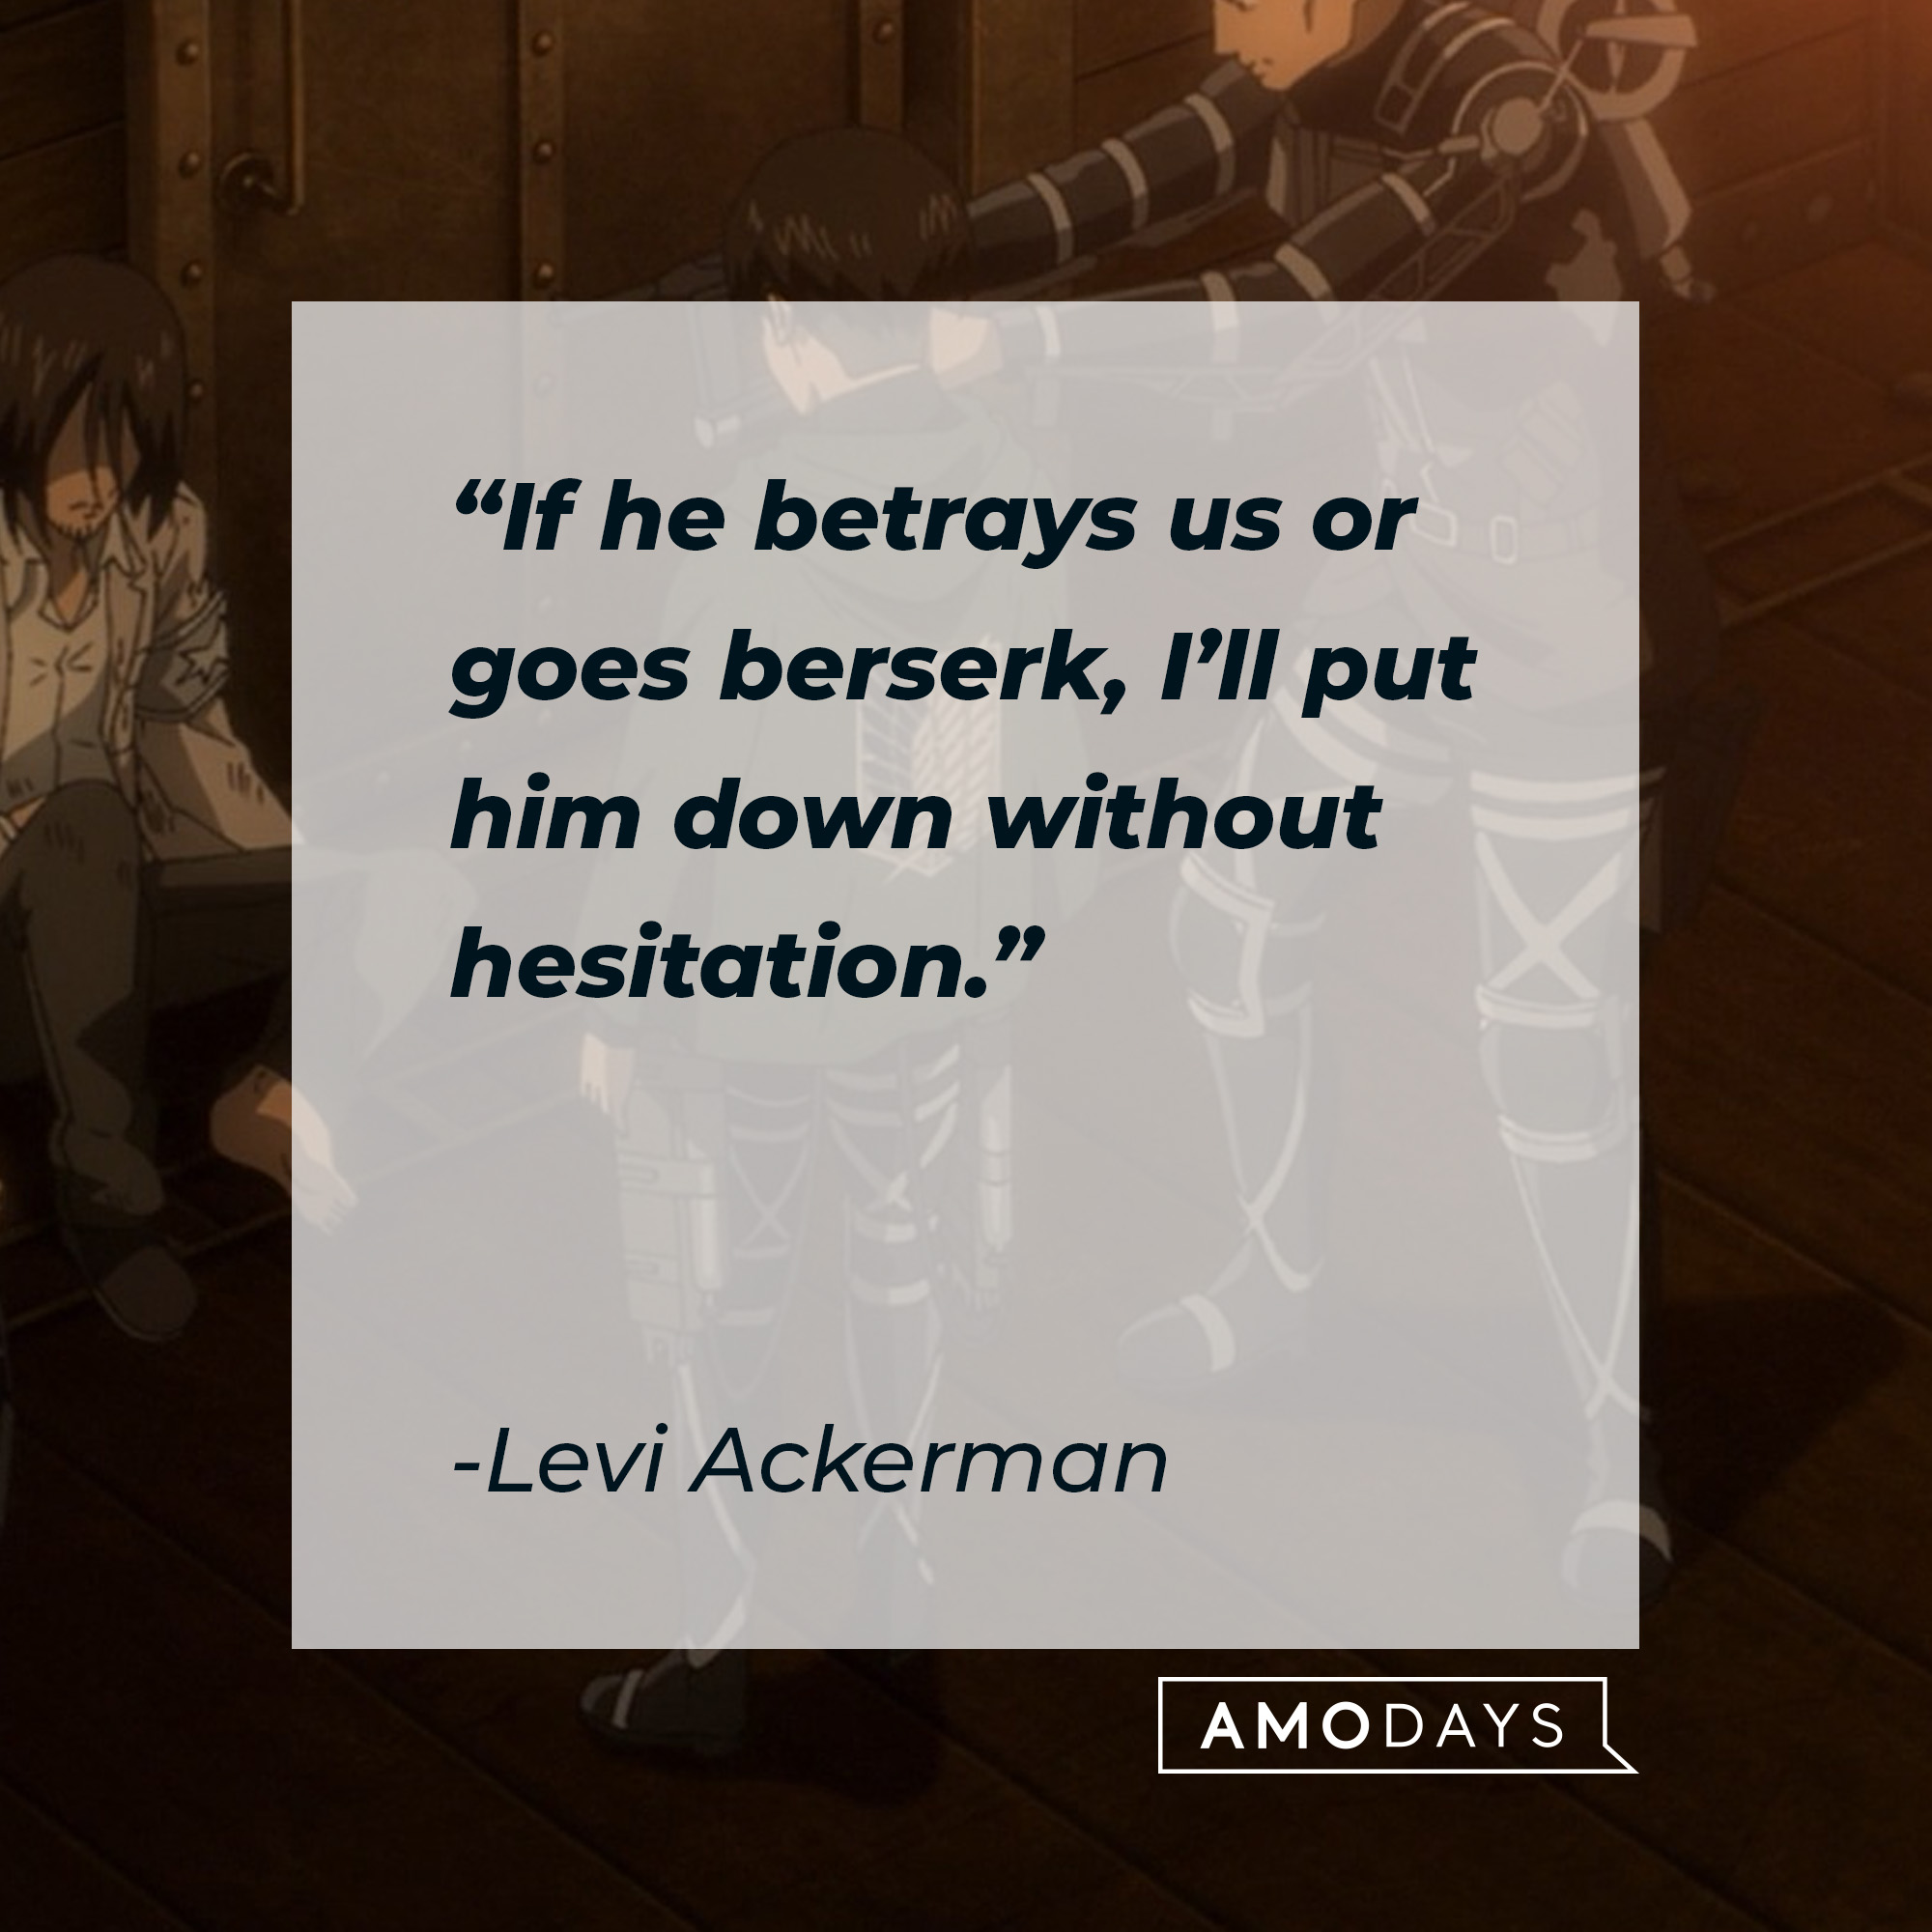 Levi Ackerman and Kenny Ackerman, with Levi’s quote: “If he betrays us or goes berserk, I’ll put him down without hesitation.” │Source: facebook.com/AttackOnTitan